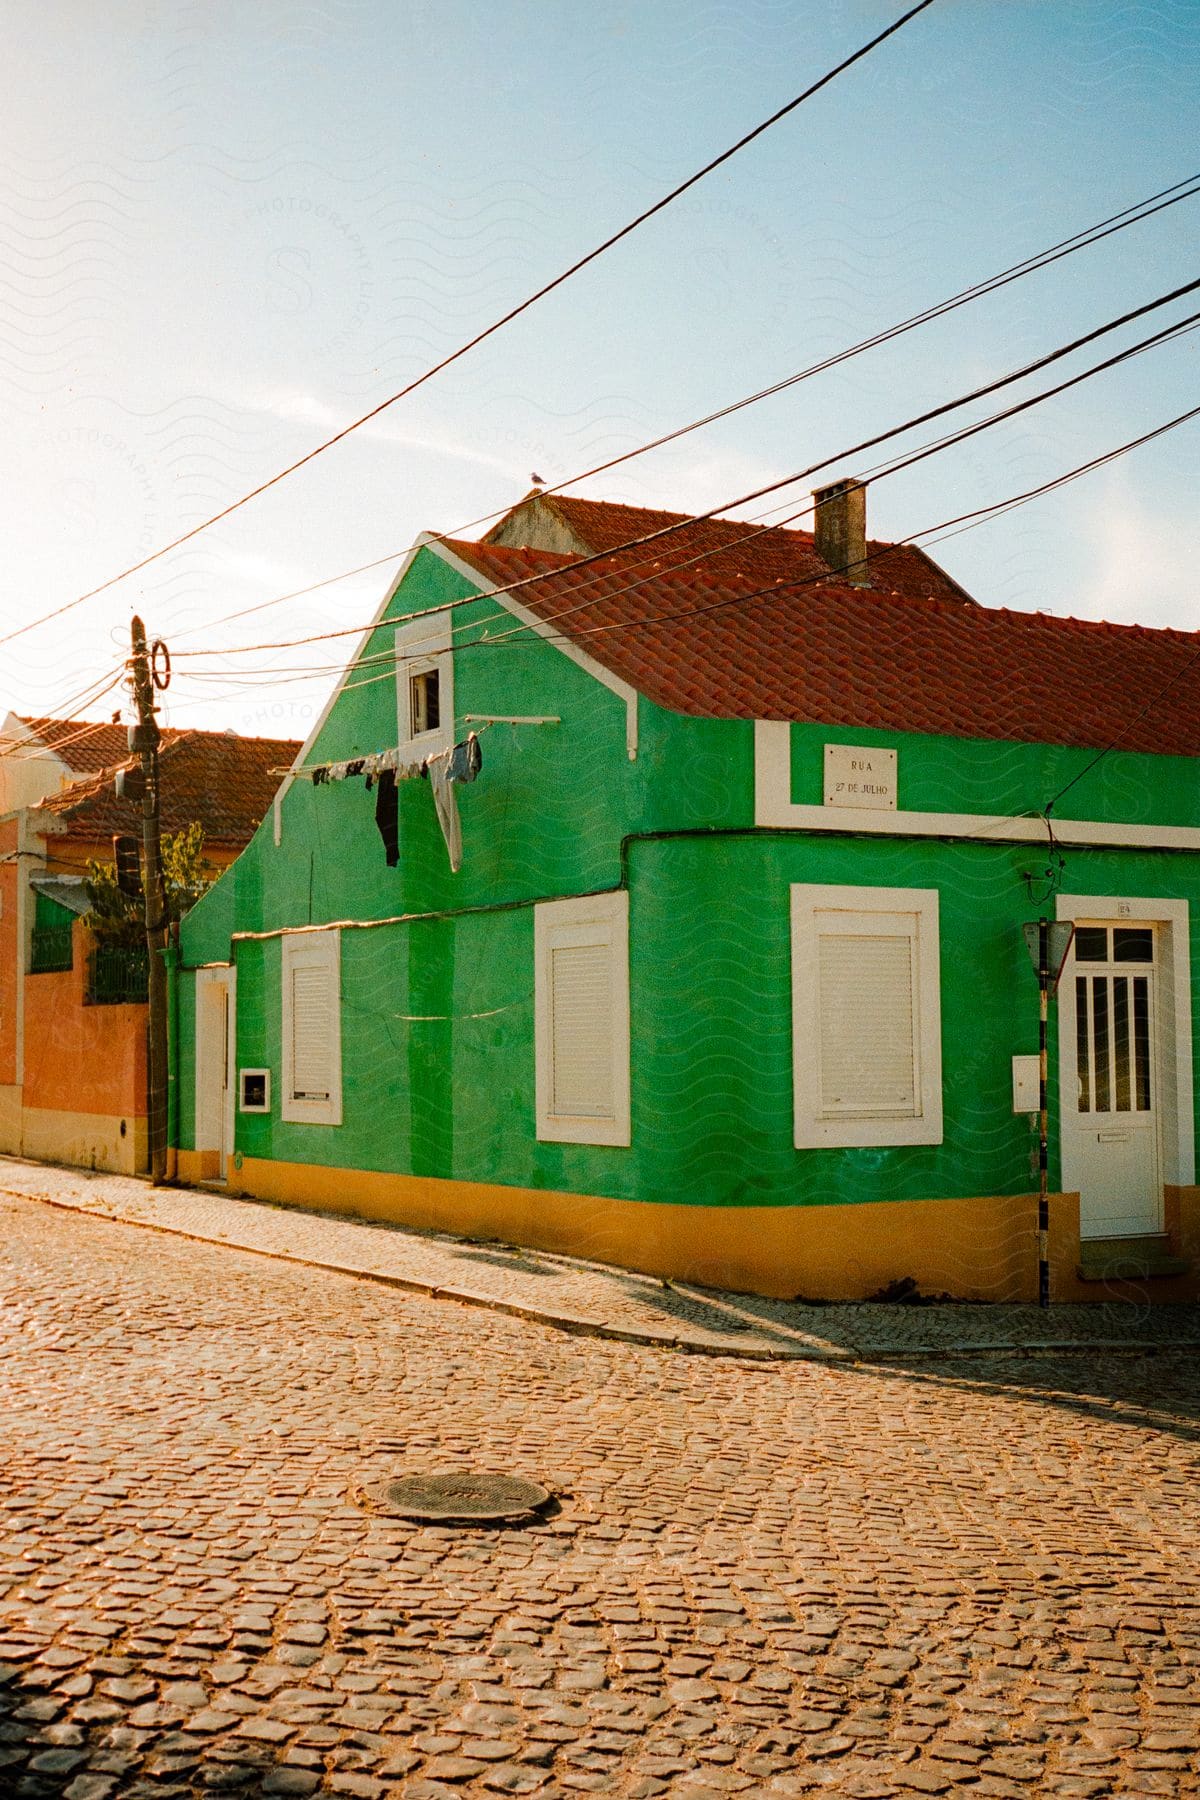 A green house is seen on the corner of a cobblestone street